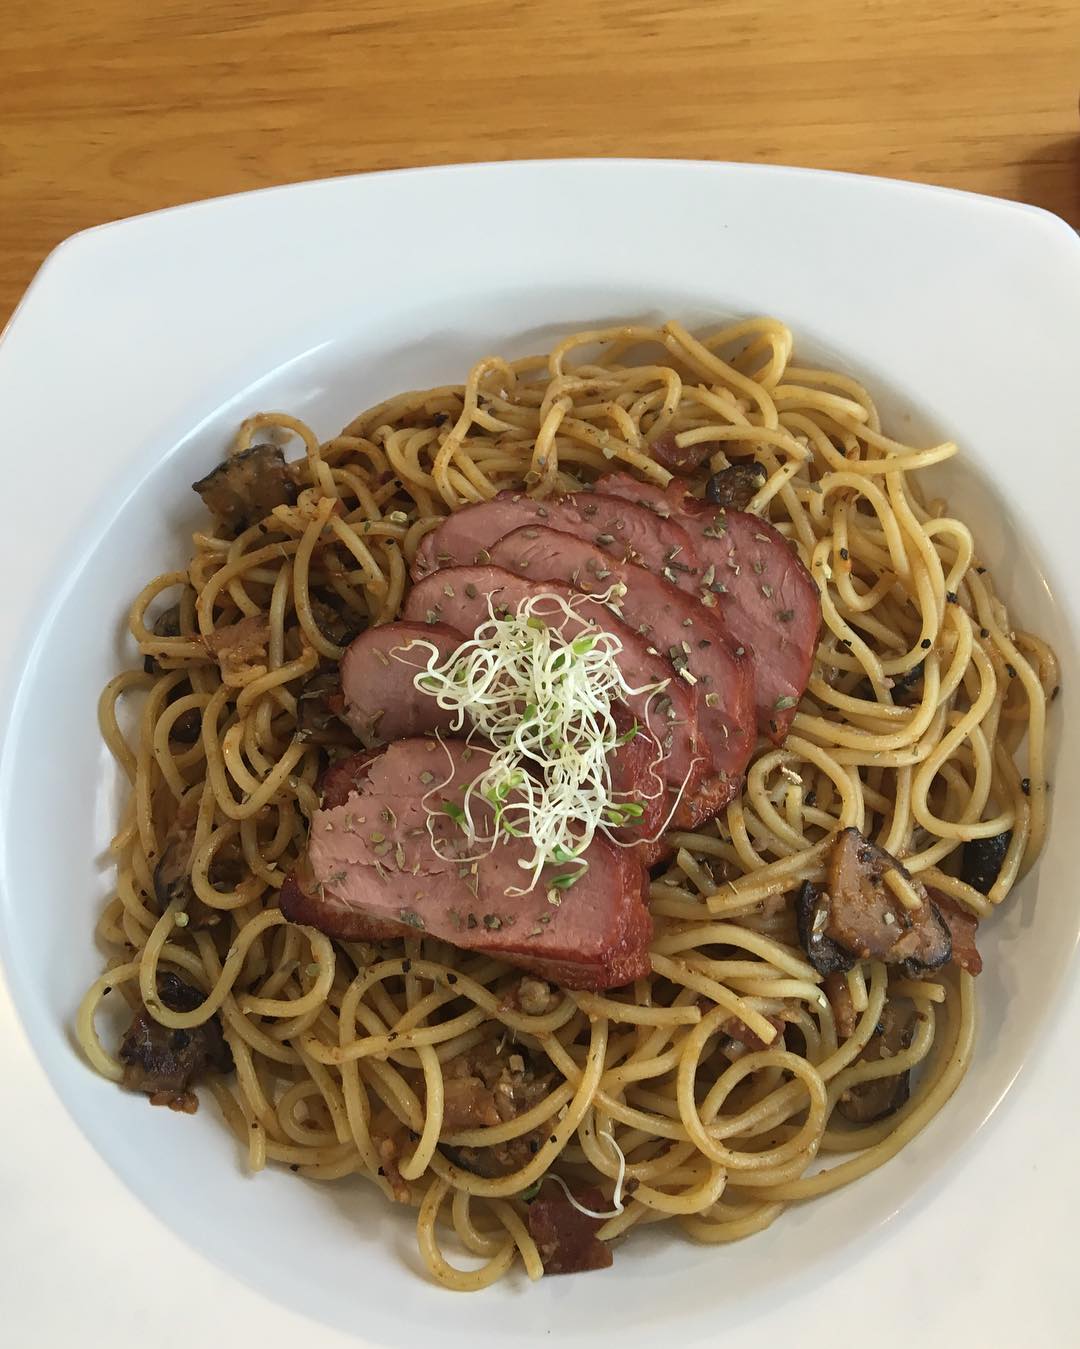 Smoked Duck Aglio Olio at Meld Grilled Kitchen.